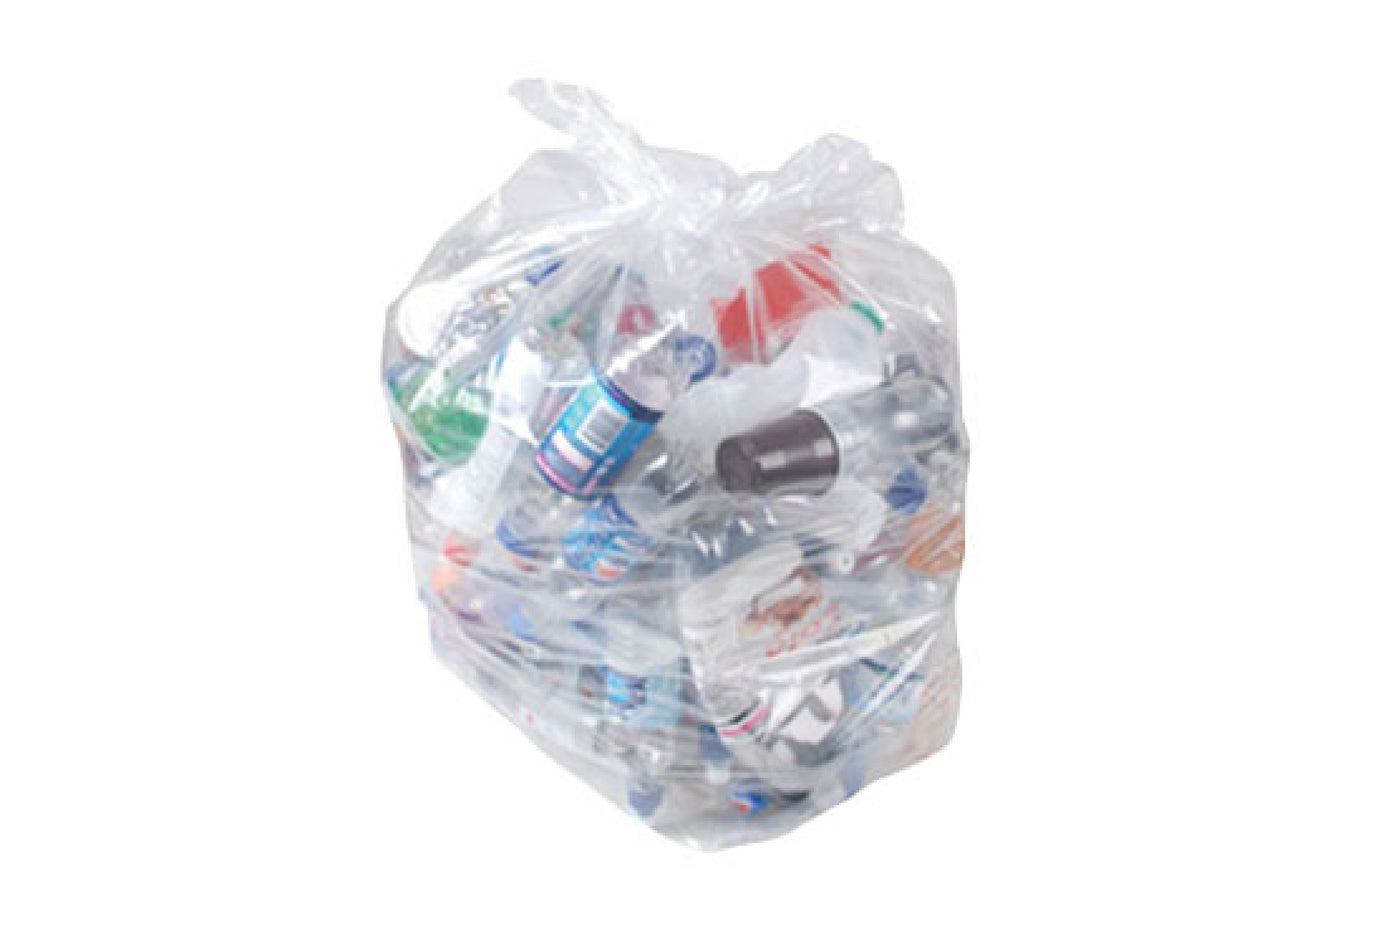 Rubbish Bags Clear – Hardy Packaging Ltd